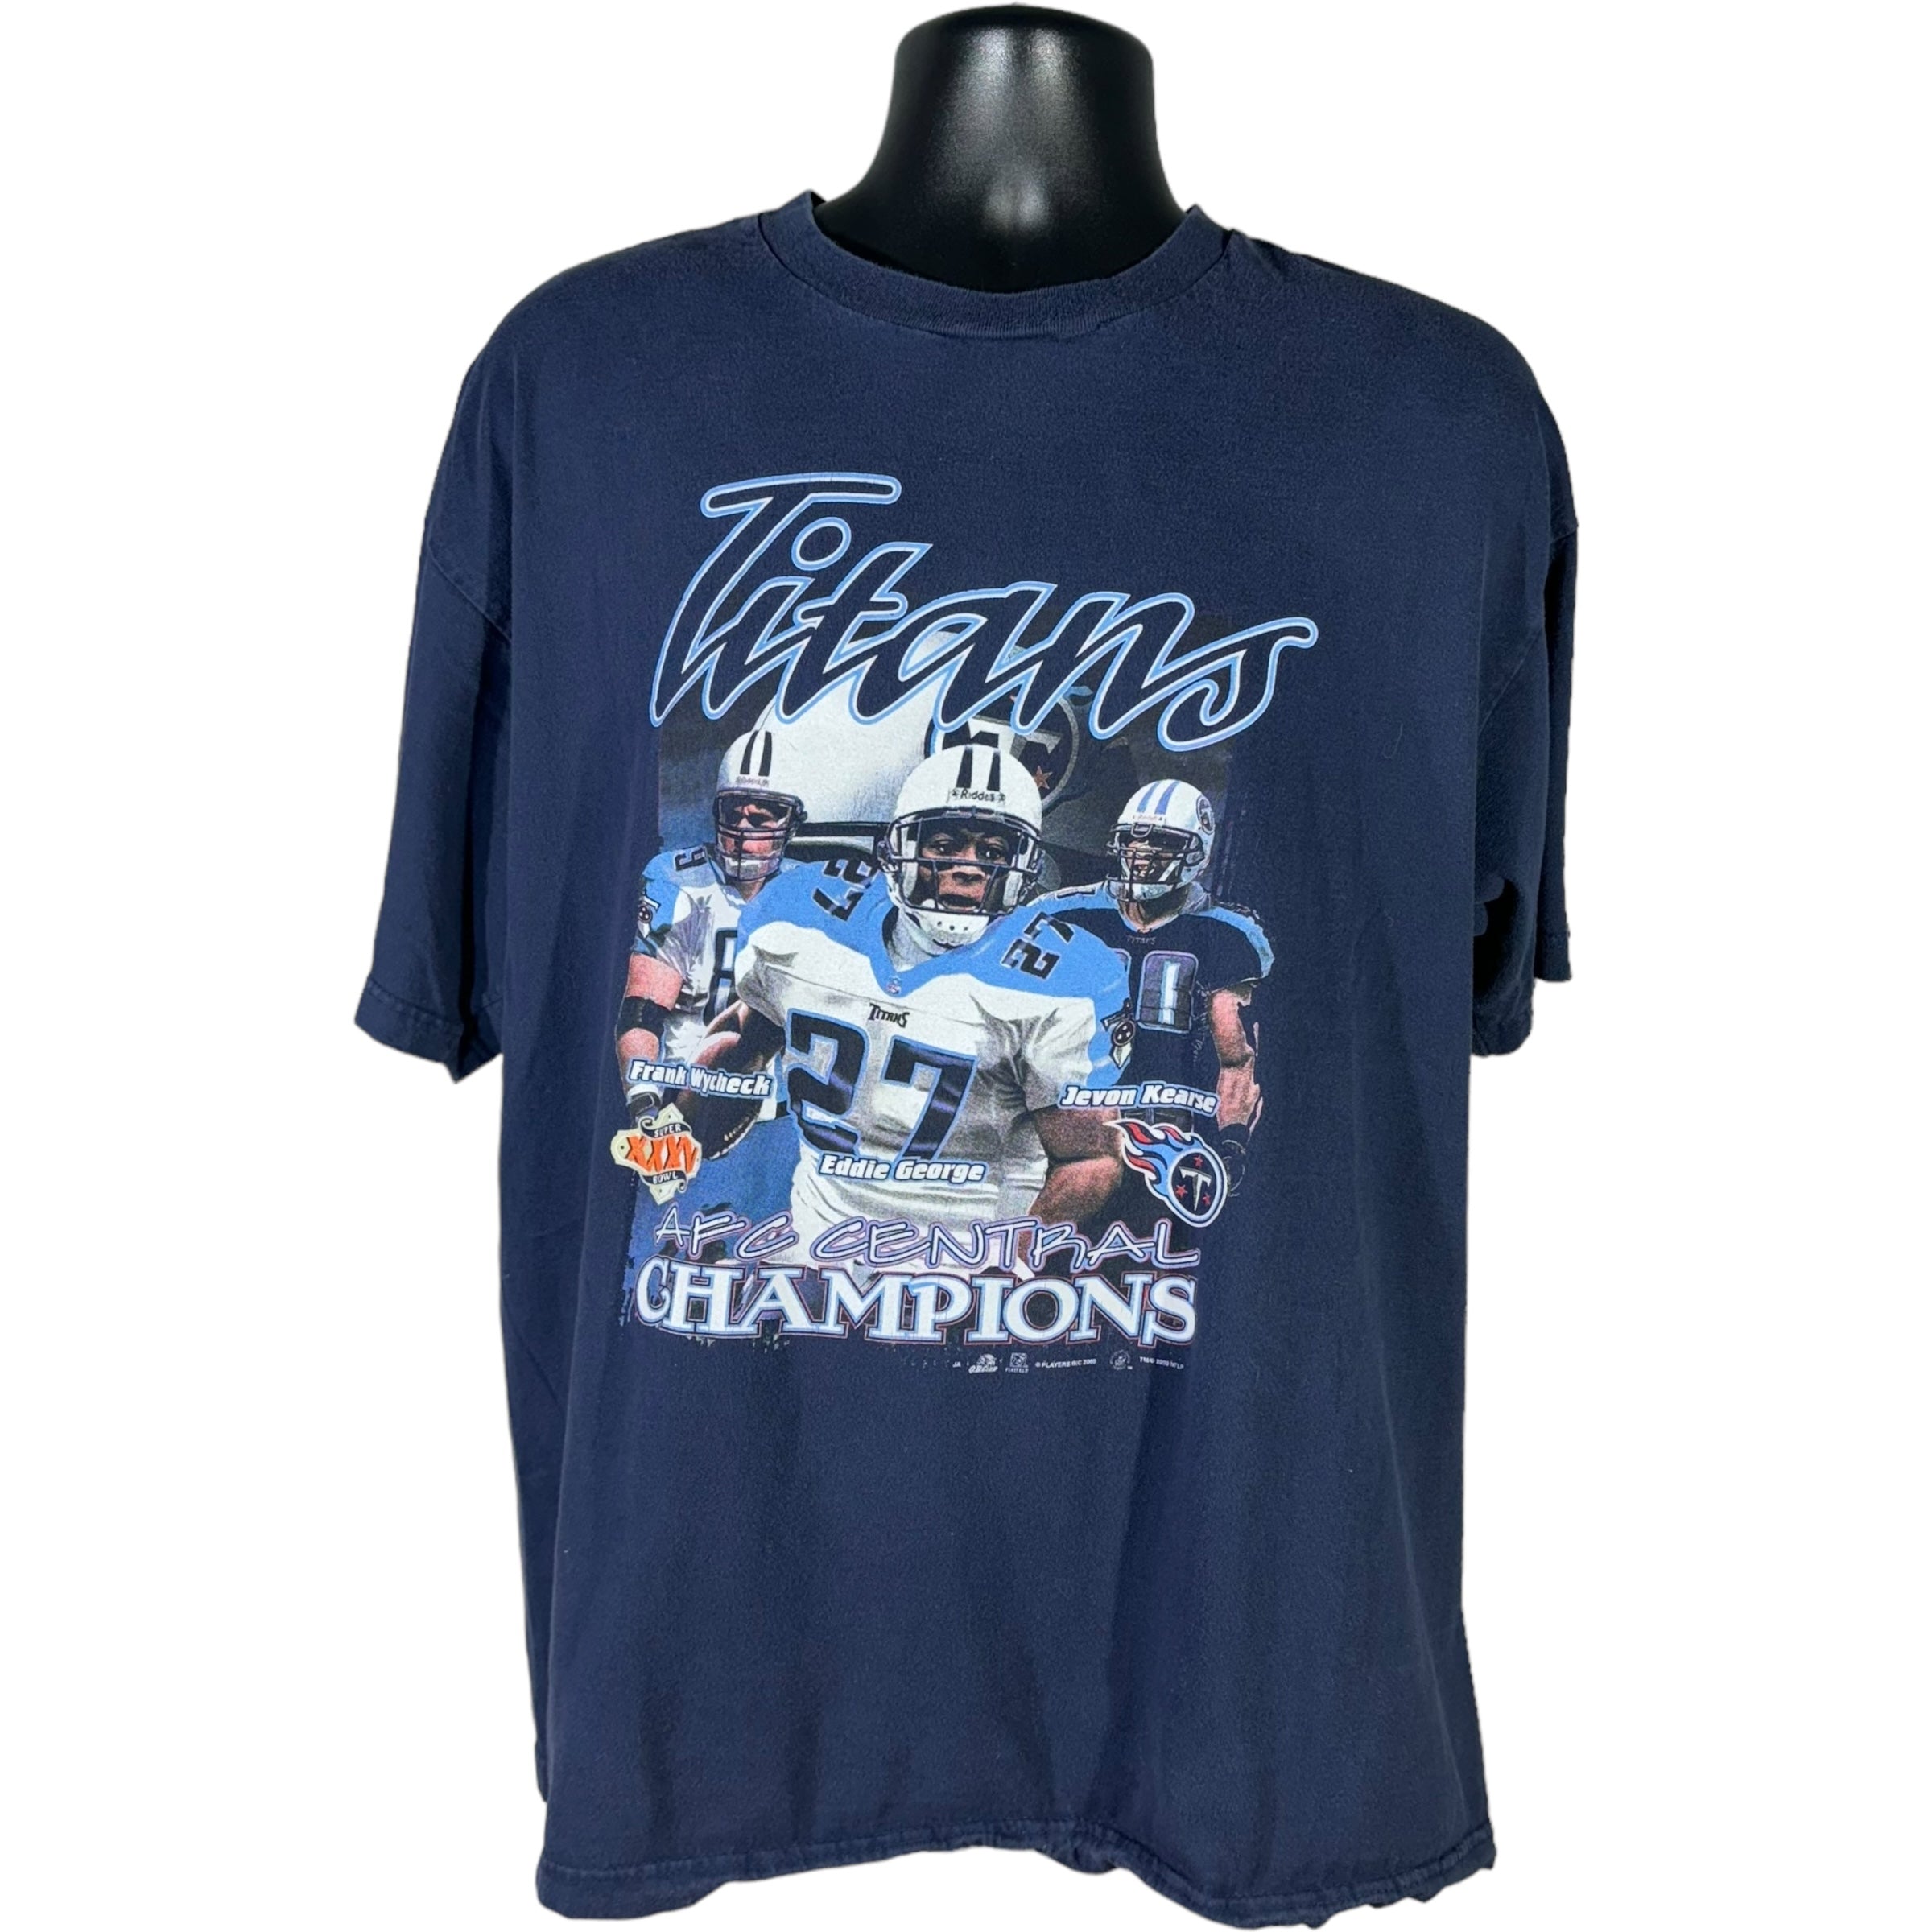 Vintage Tennesse Titans AFC Central Champions Tee